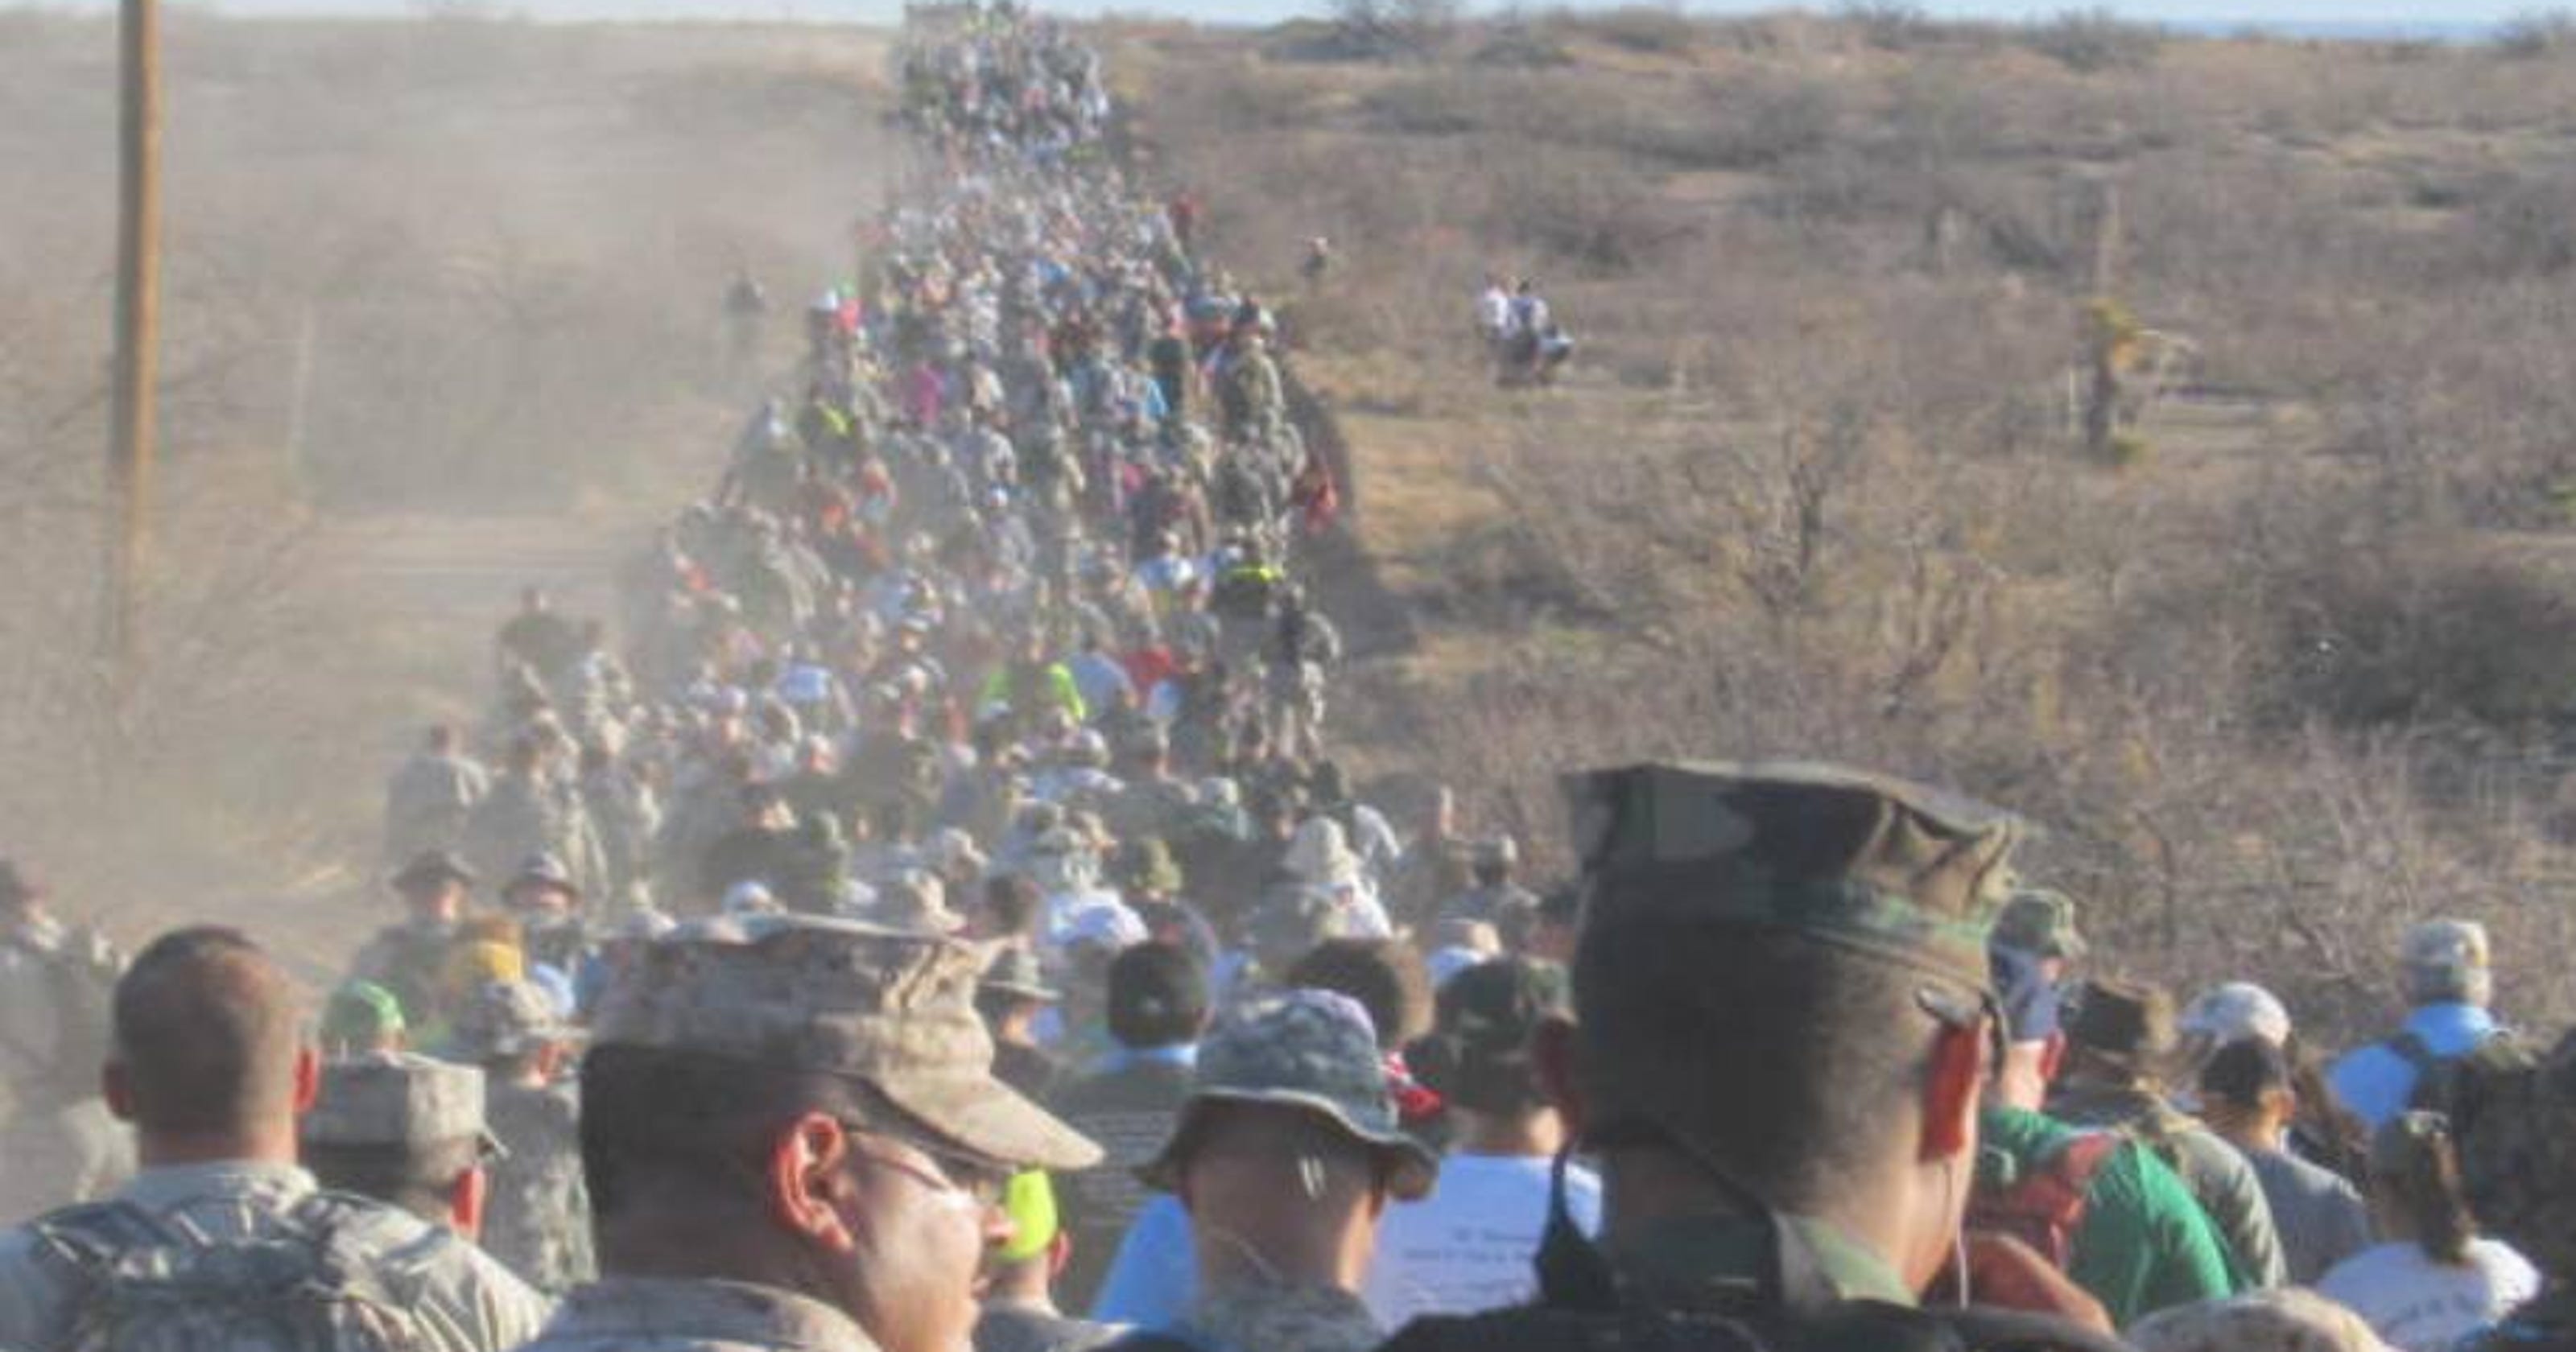 Bataan Death March: 12,000 to march at White Sands Sunday3200 x 1680